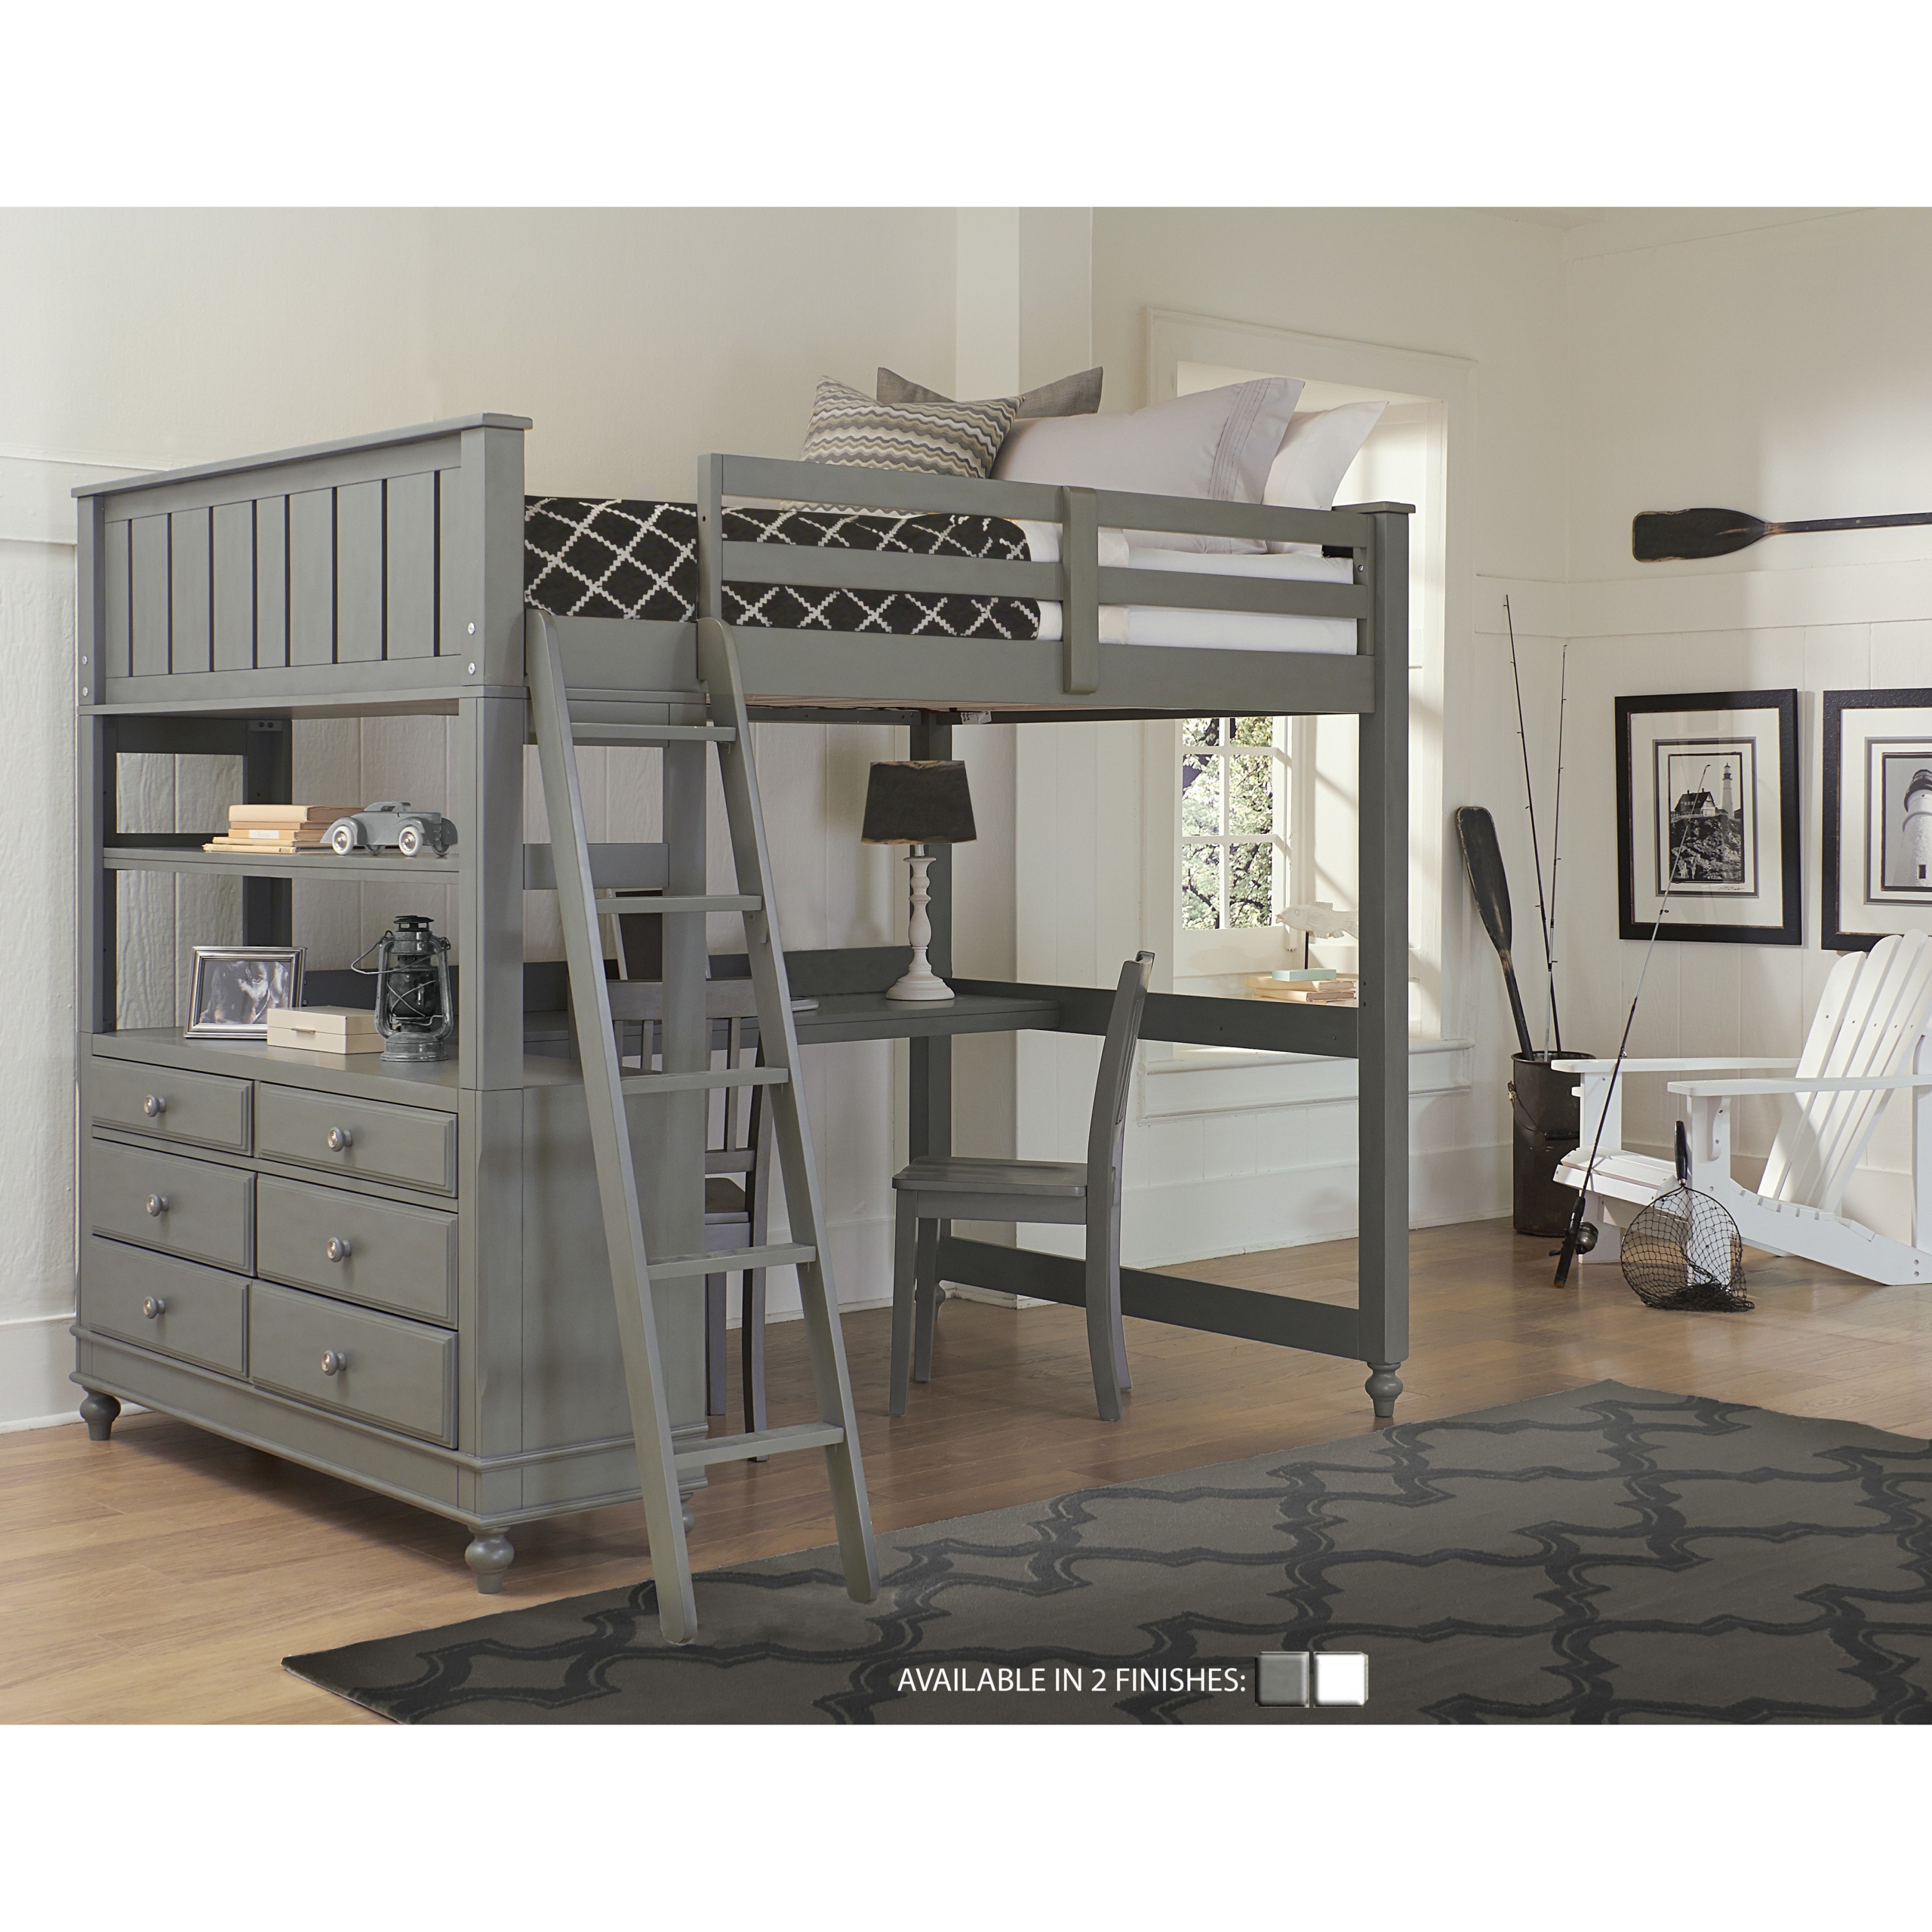 double bunk bed with space underneath